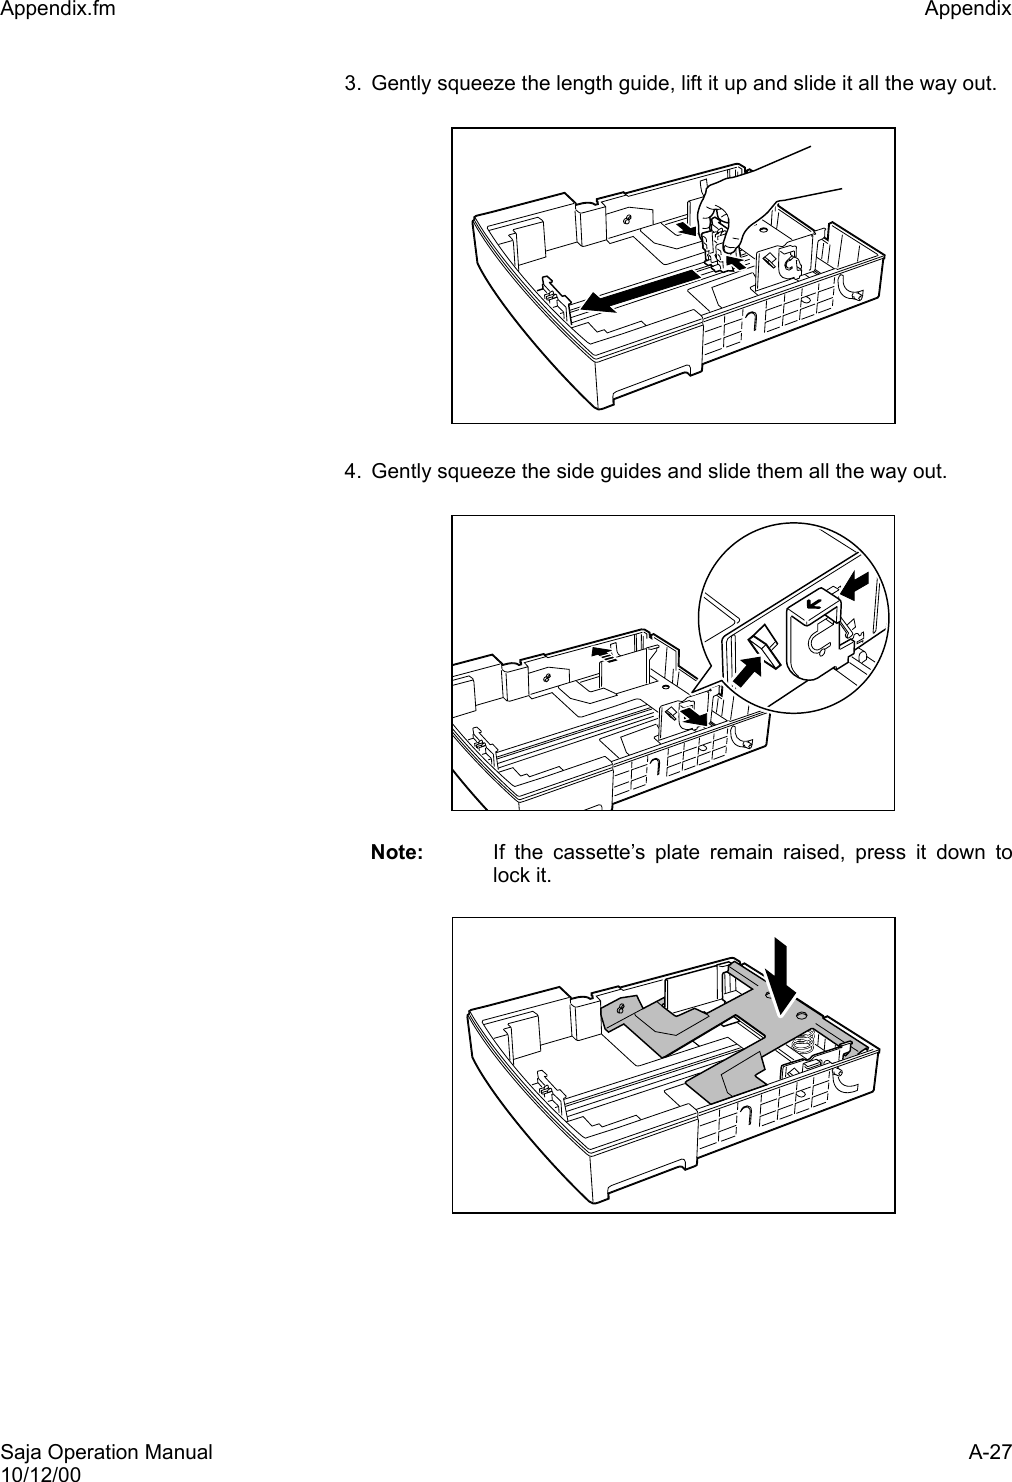 Saja Operation Manual A-2710/12/00Appendix.fm Appendix 3. Gently squeeze the length guide, lift it up and slide it all the way out.4. Gently squeeze the side guides and slide them all the way out. Note: If the cassette’s plate remain raised, press it down tolock it.